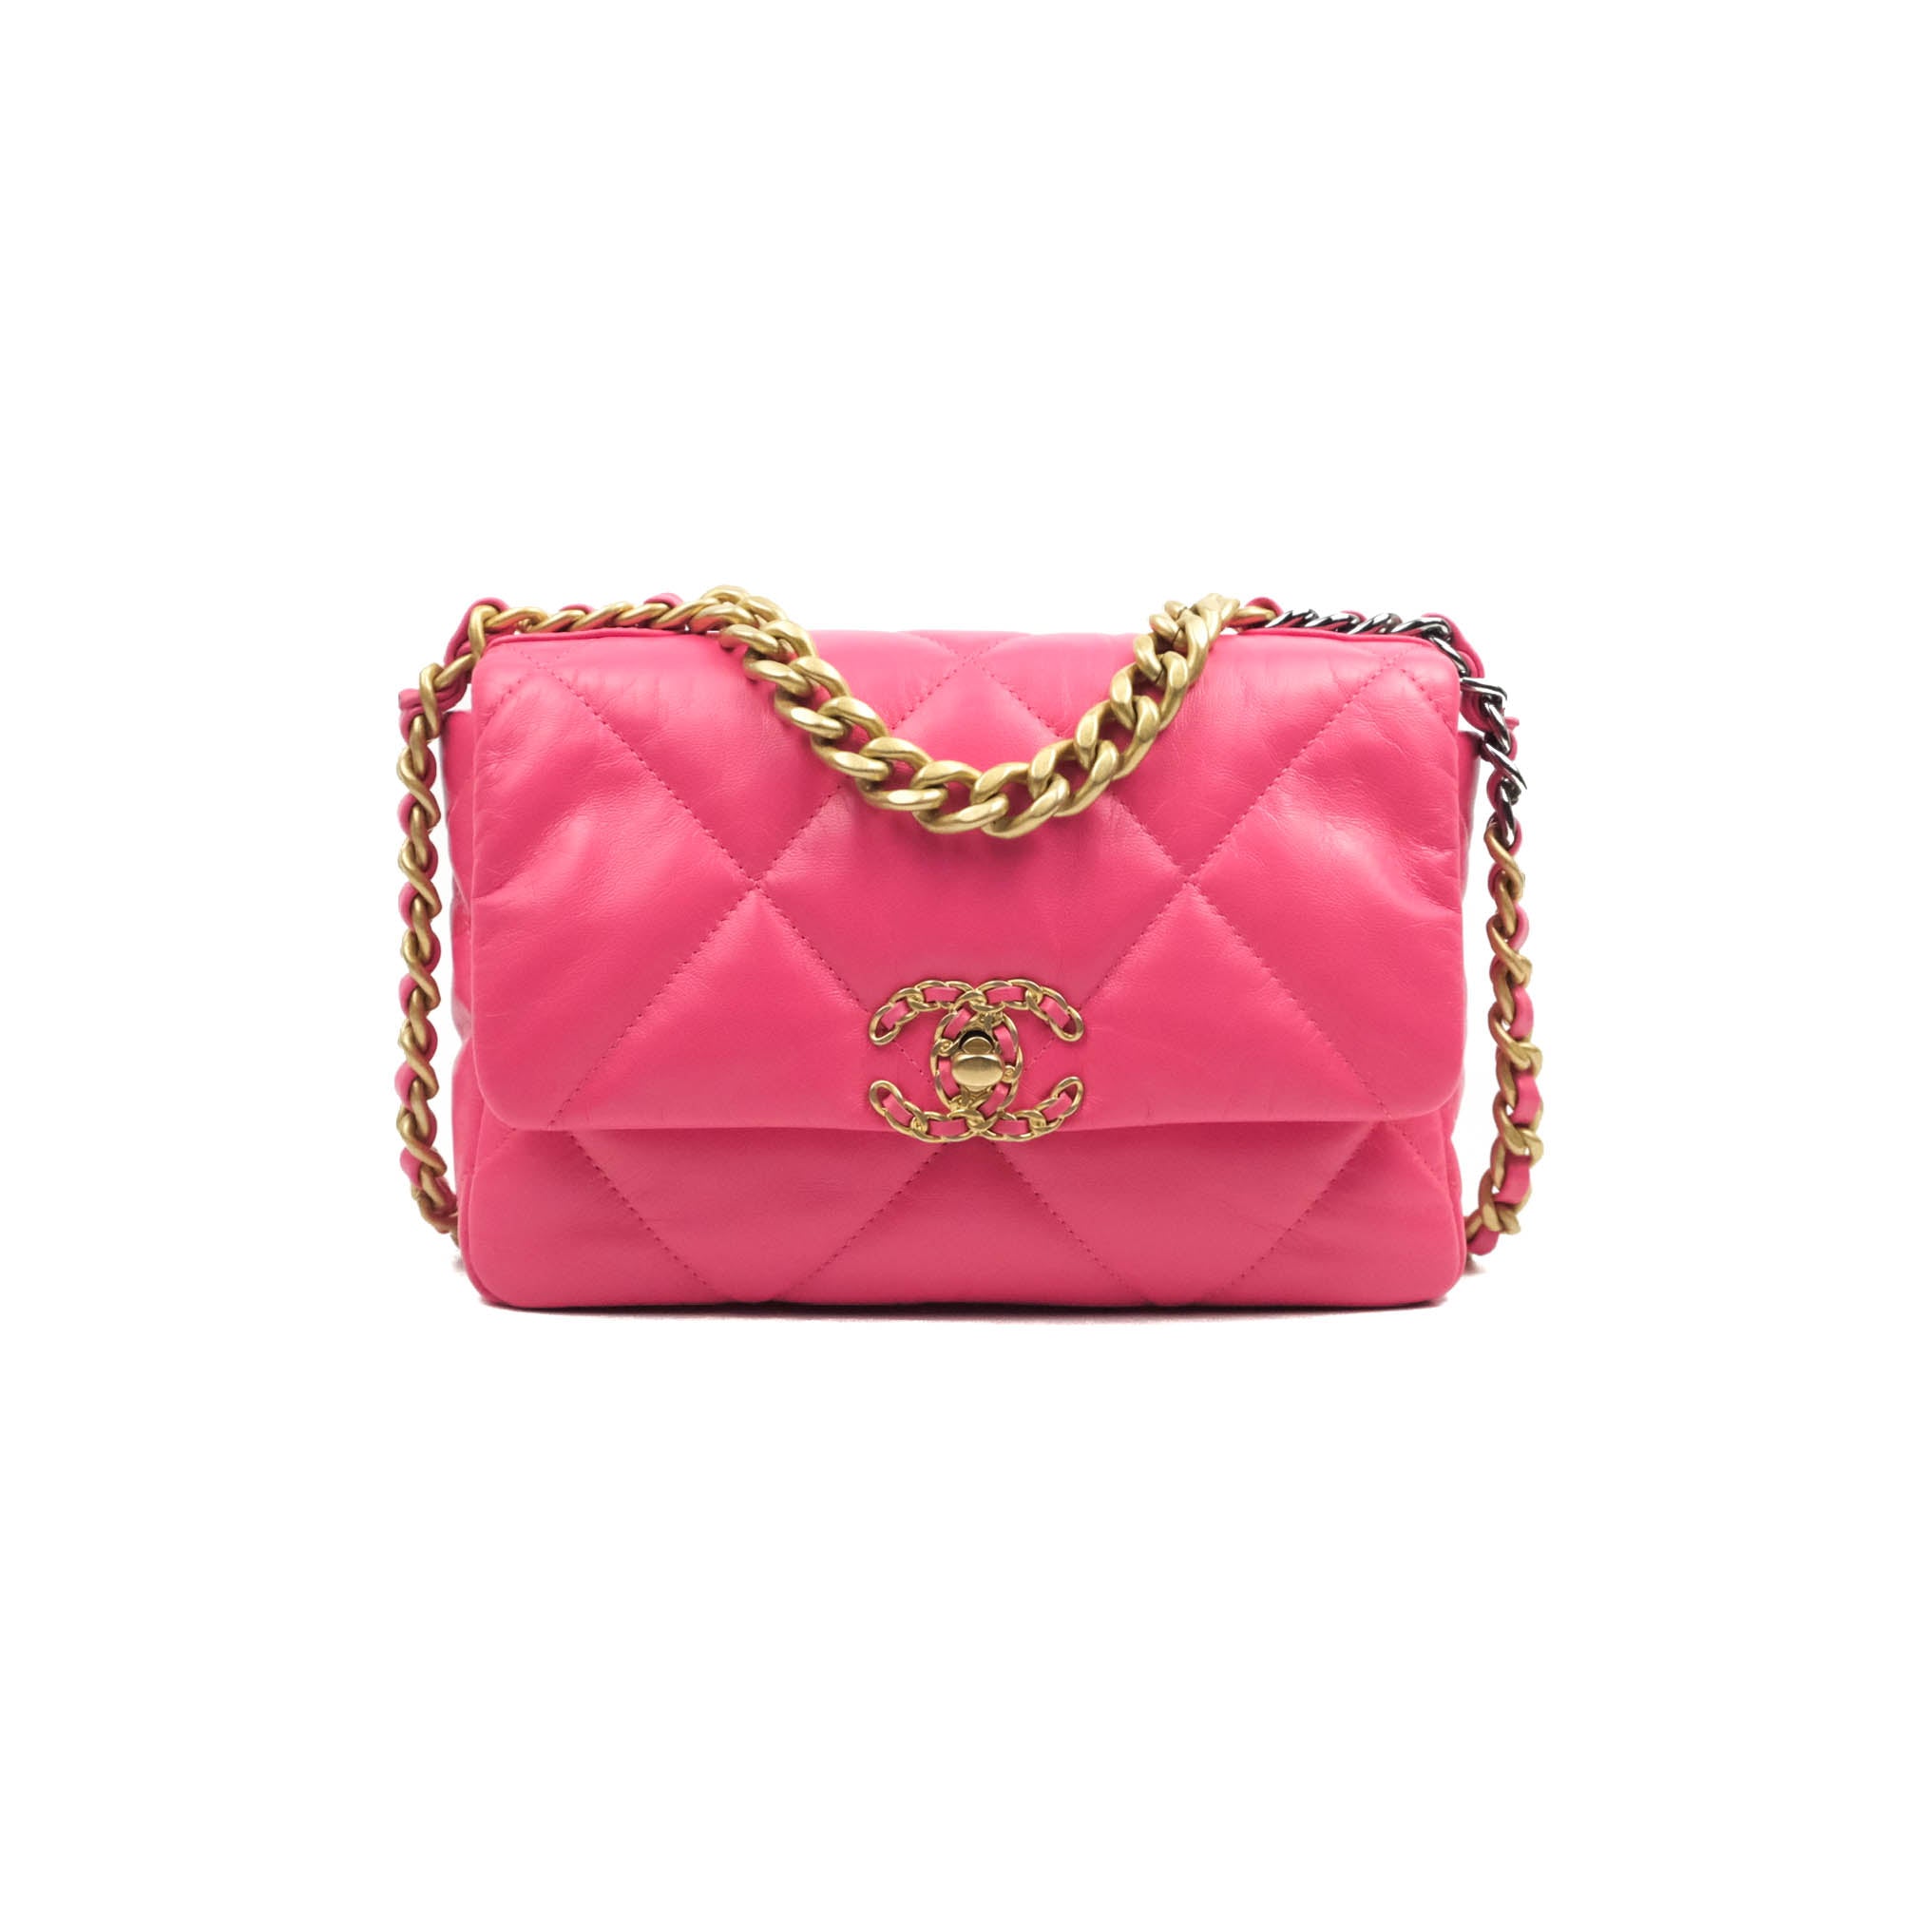 Chanel 19 *Rare* Flap Bag Quilted Tweed Medium In Pink